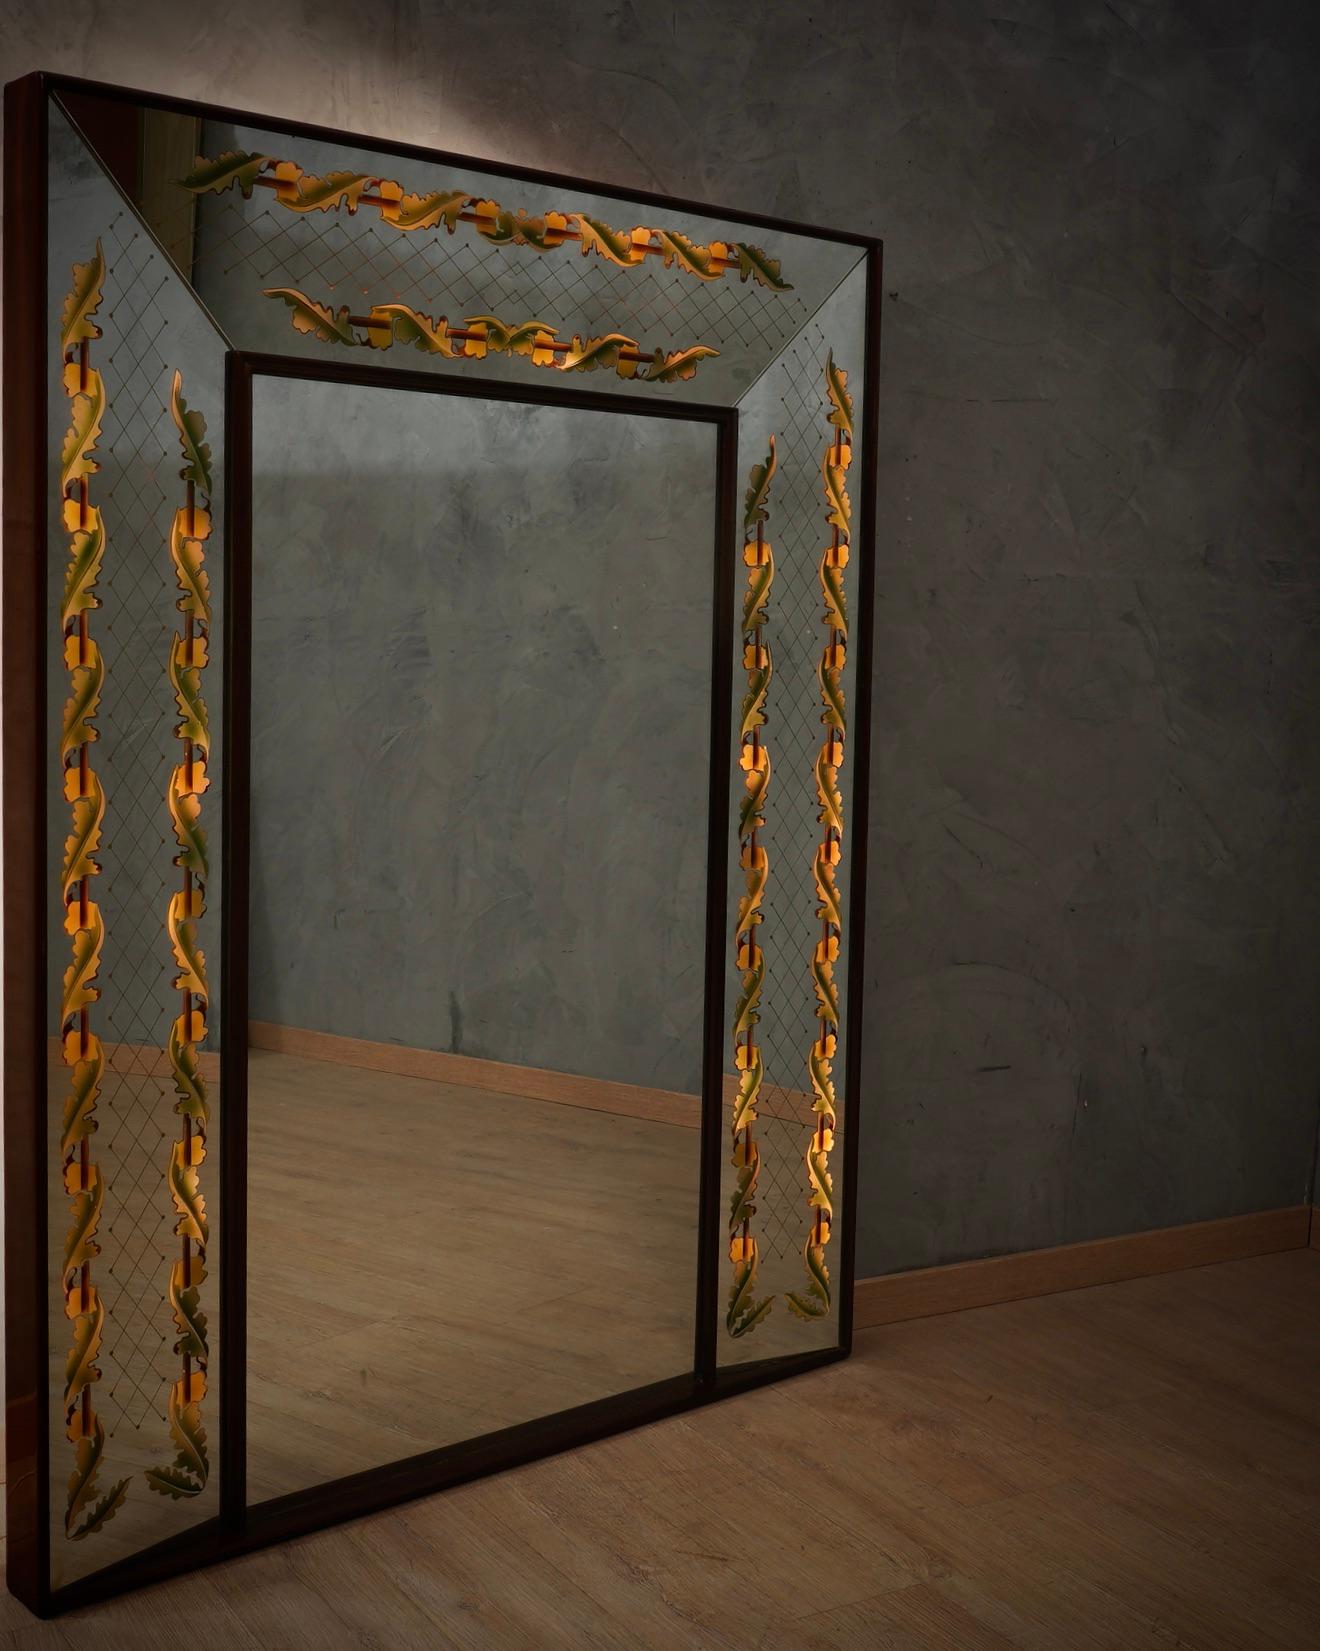 Very elegant mirror by Luigi Brusotti, original and one-of-a-kind design, with internal electrification.

The mirror has a wooden structure, and all around the perimeter there are walnut wood moldings. The front part has mirrored and painted glass